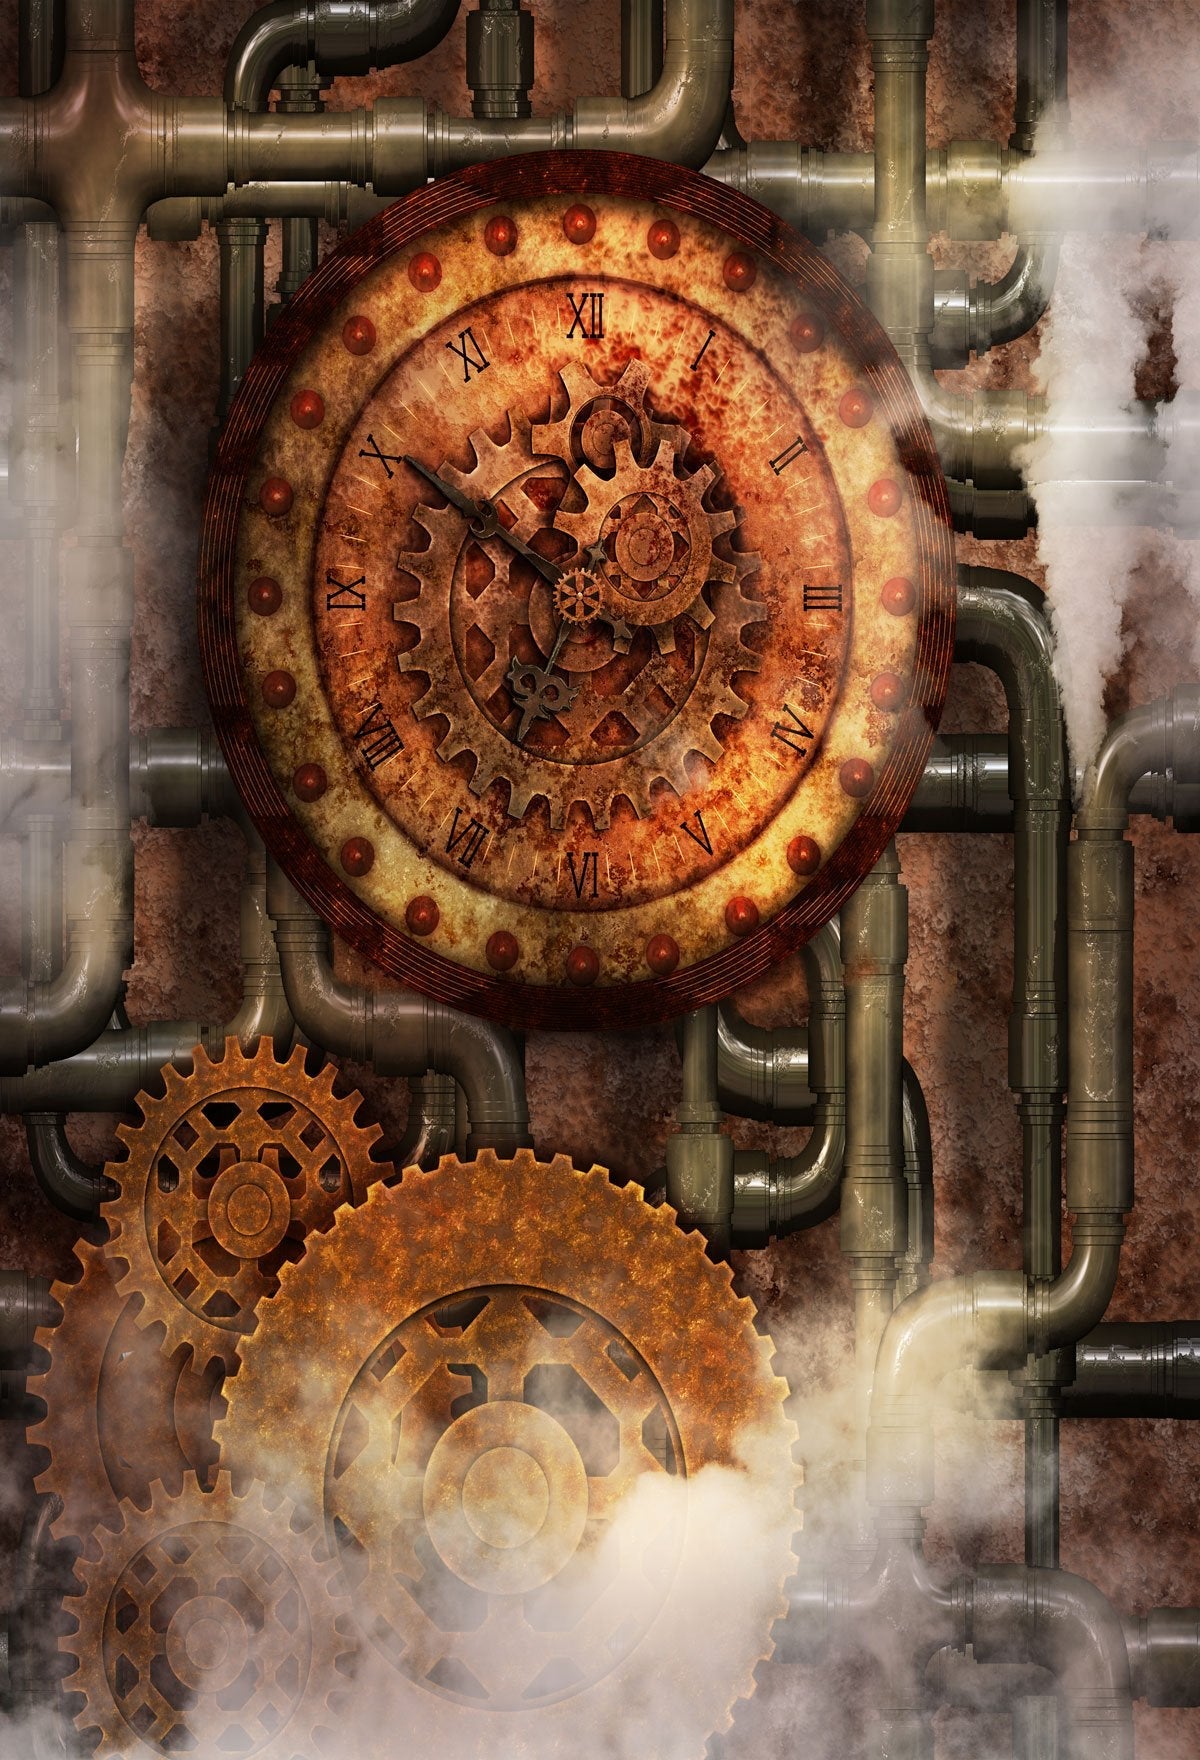 Katebackdrop：Kate Steampunk style background with gears and clocks